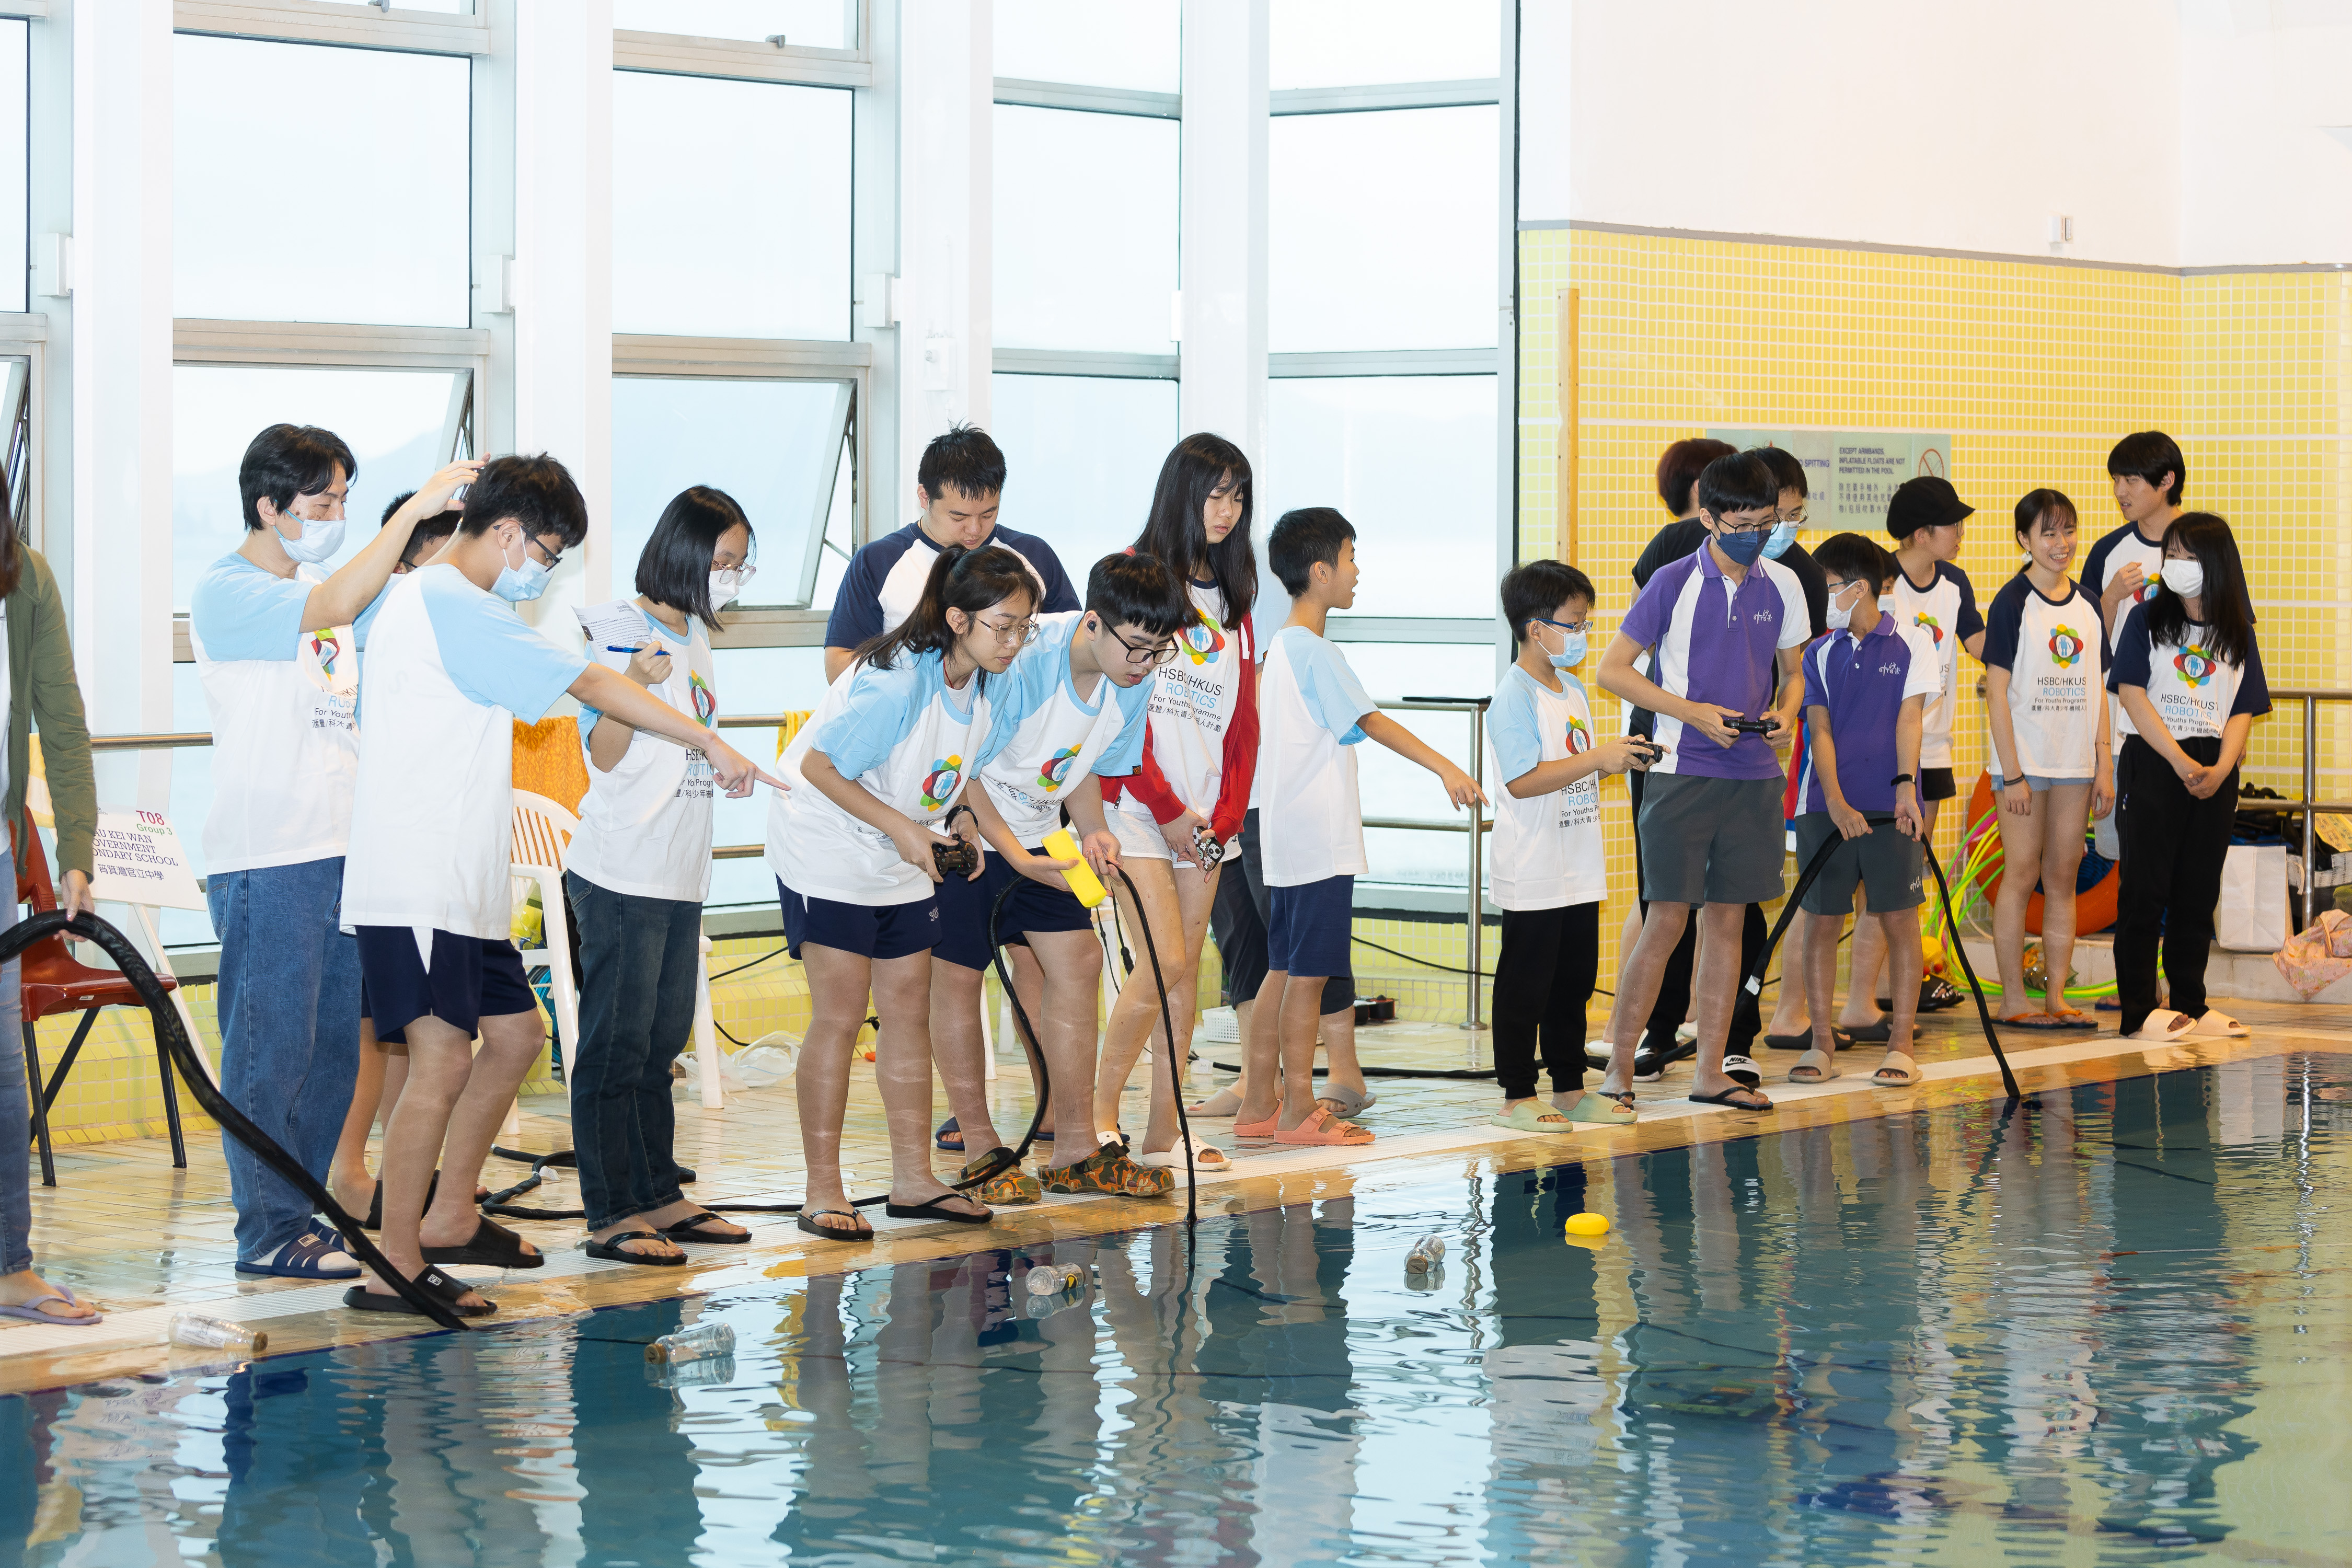 The joint-school competition provided a chance for the students to engage in cross-school collaboration.